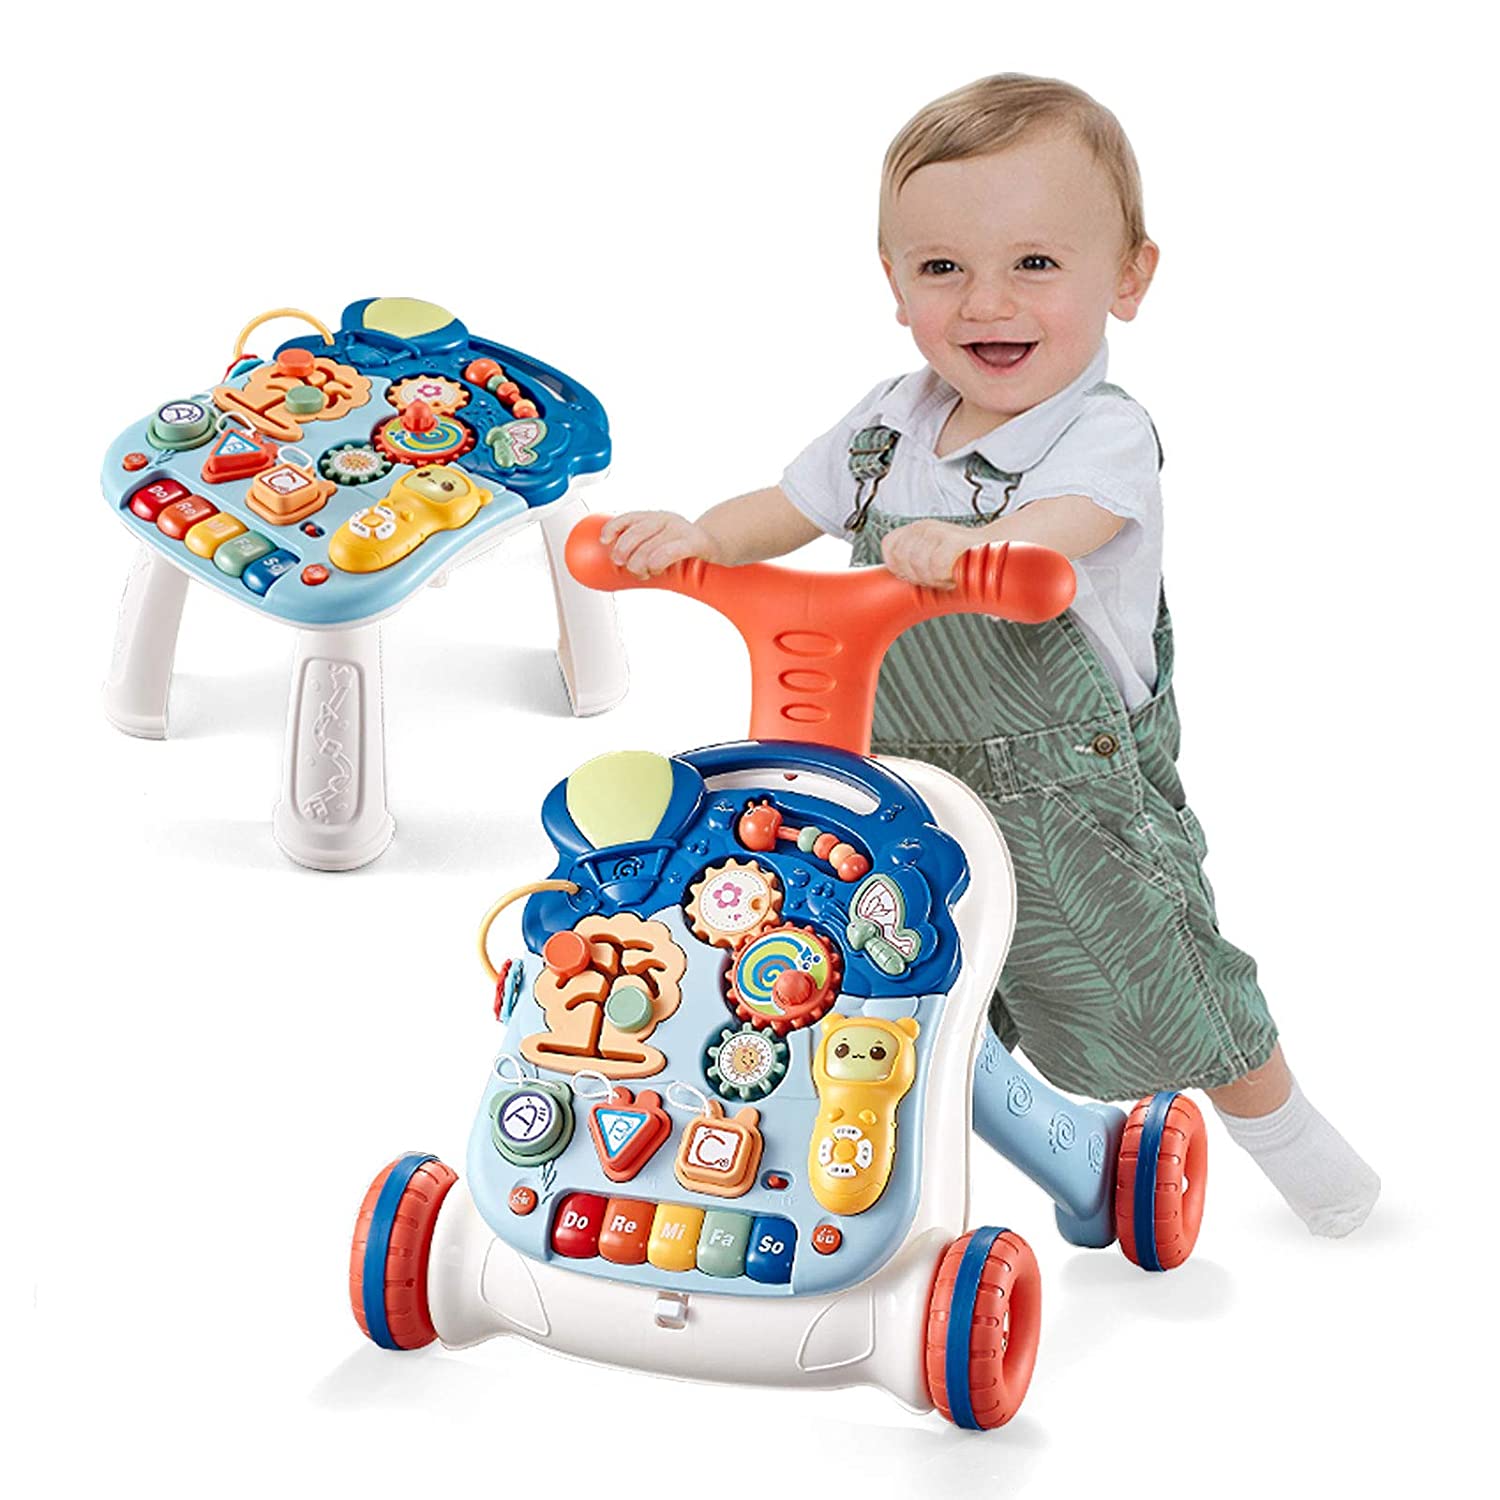 Fixed Competitive Price Feeding Baby At 4 Months - Arkmiido Sit-to-Stand Learning Walker Baby Walker Kids Activity Center, Entertainment Table Lights & Sounds, Music, Phone, Steering Wheel, Ed...